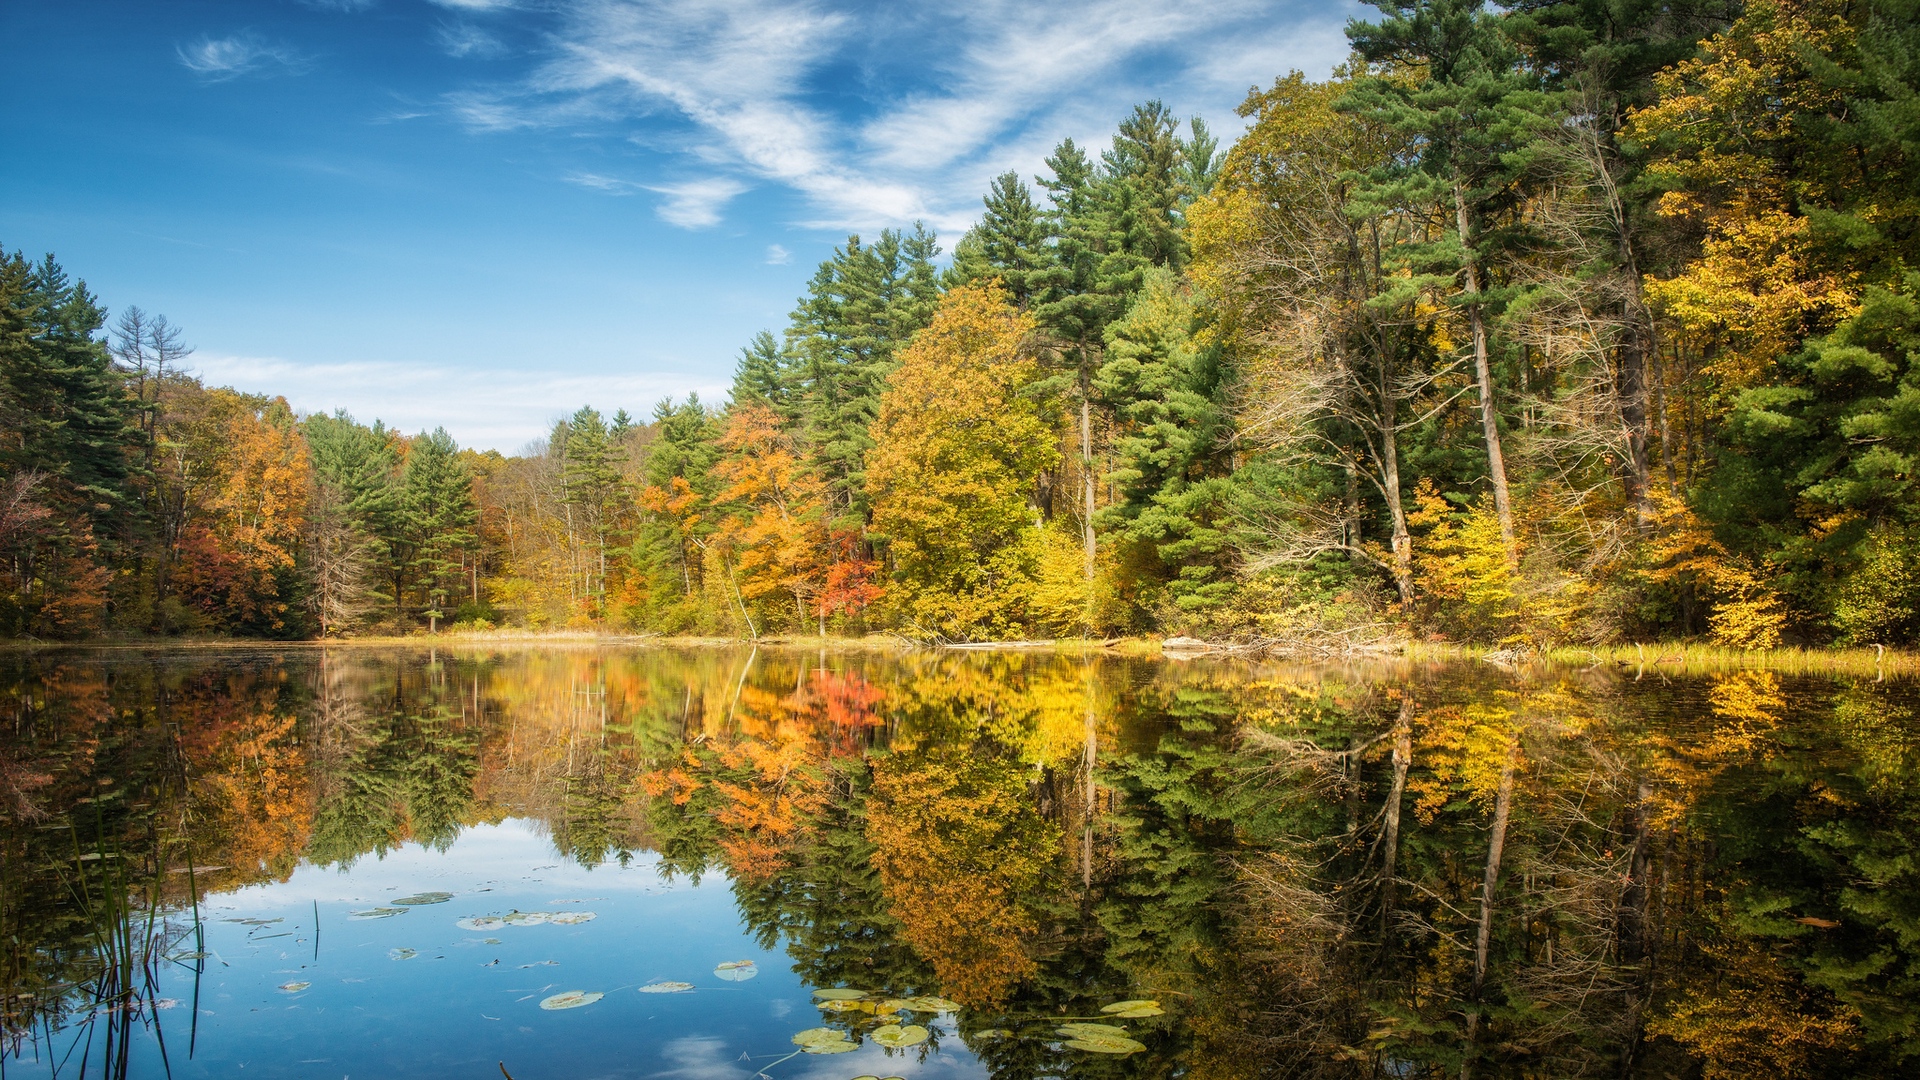 Download wallpaper 1920x1080 lake, forest, autumn, trees